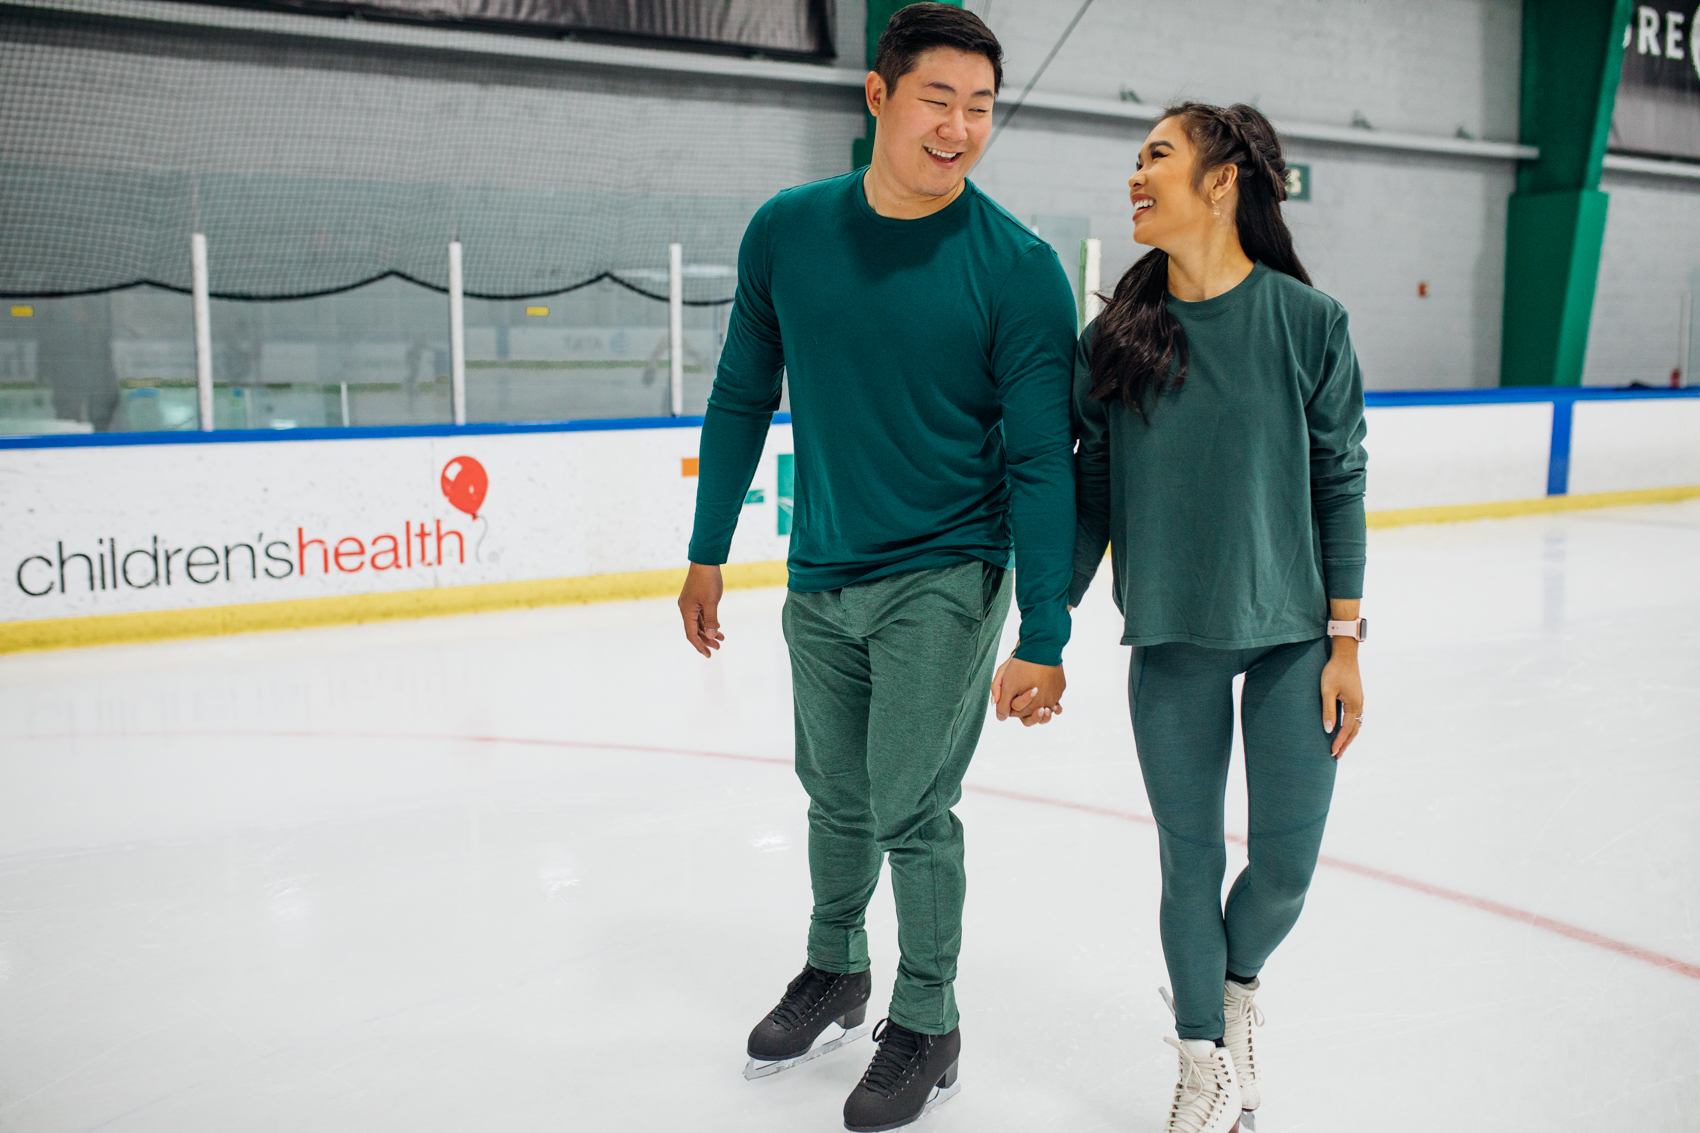 Going ice skating together for date night idea